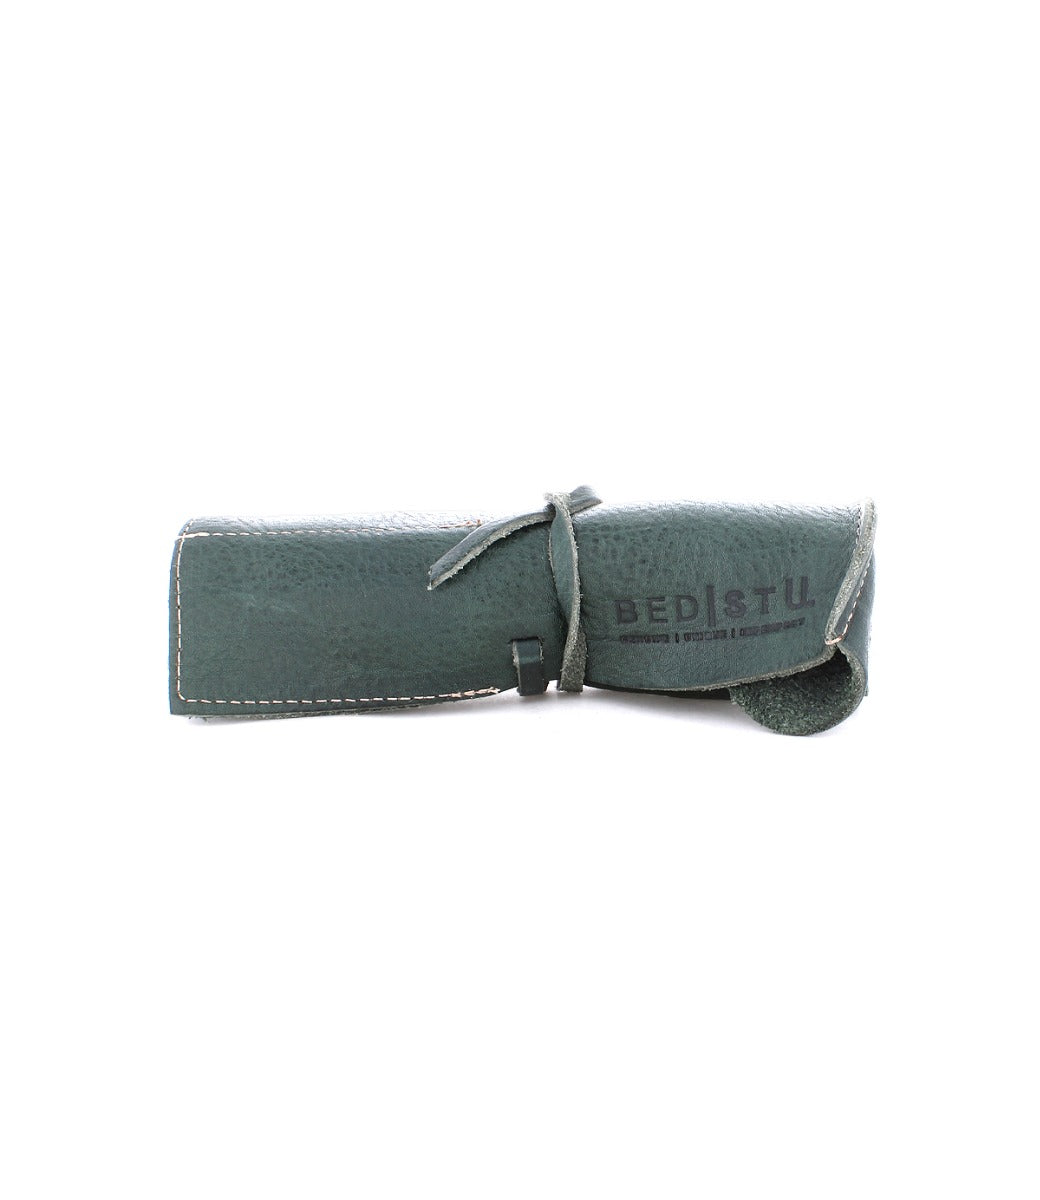 A green leather Prepped pencil case with a Bed Stu leather strap.